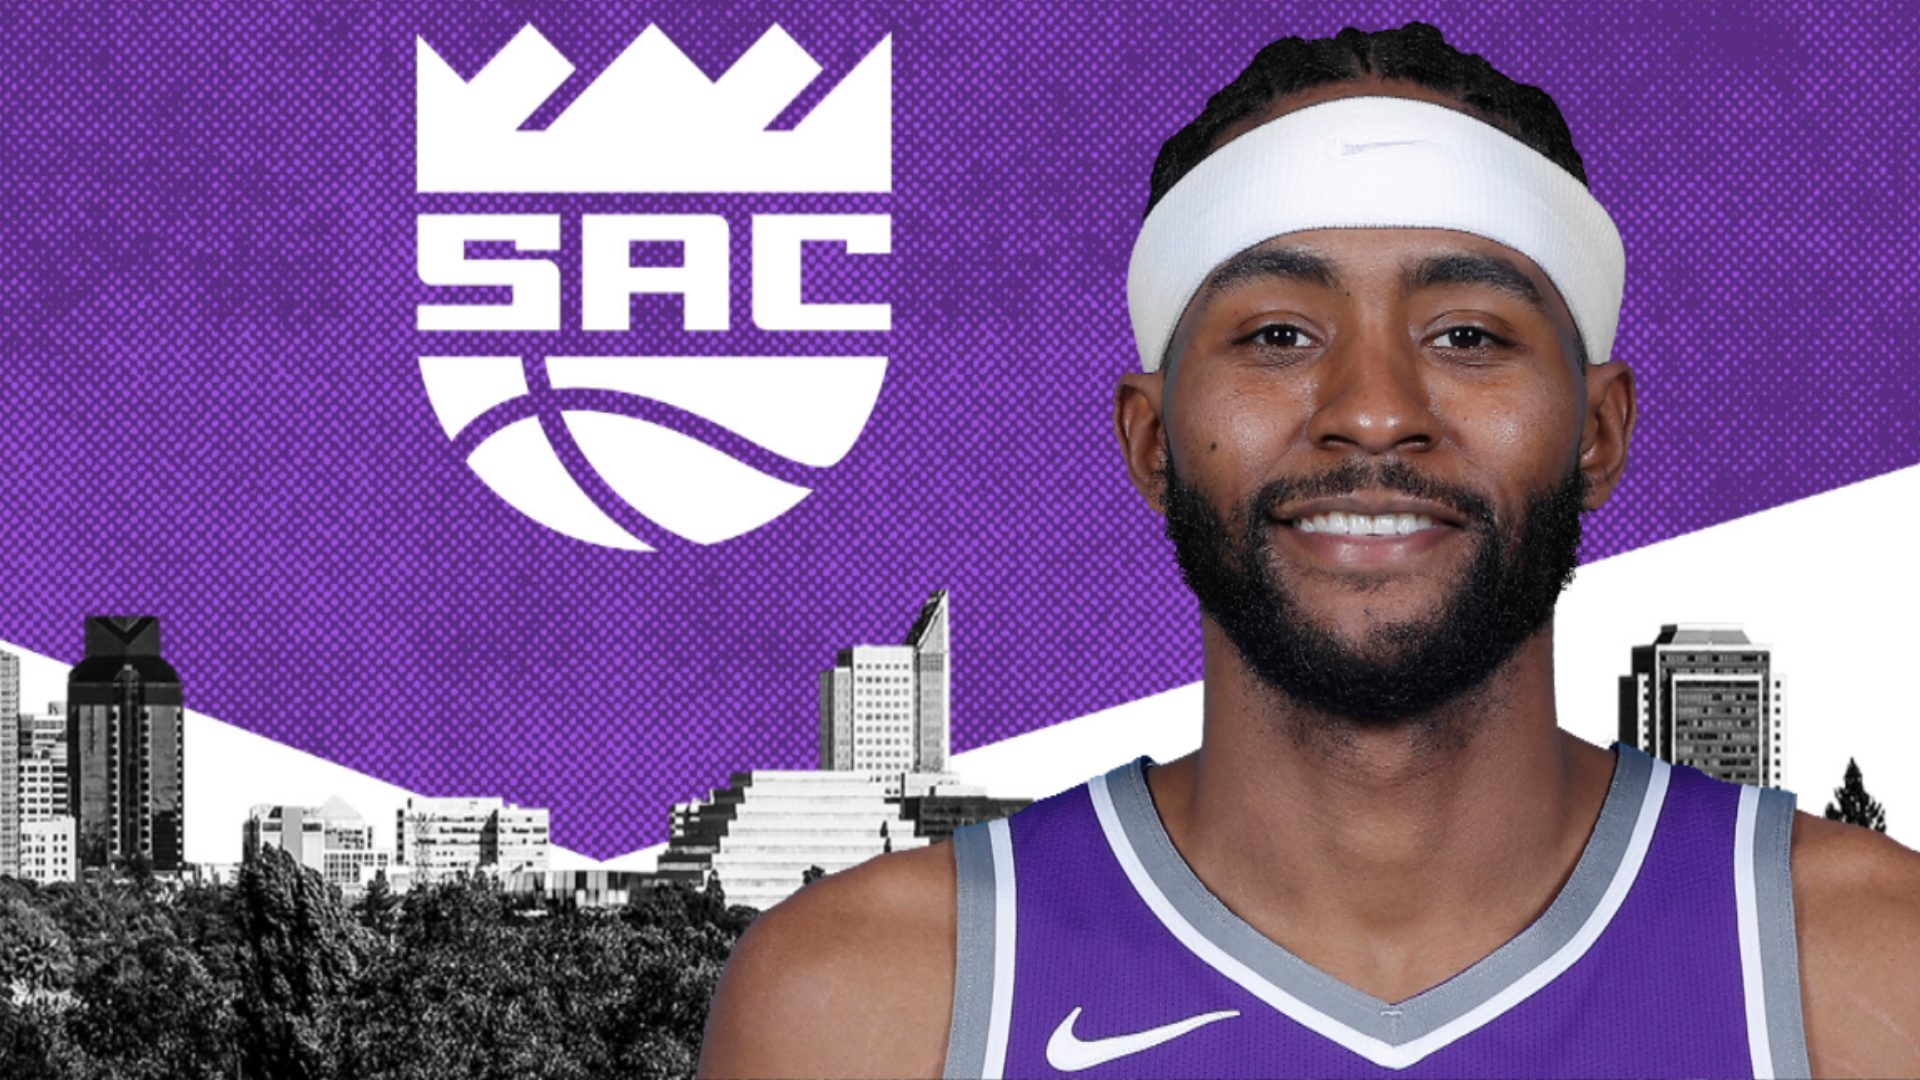 Moe Harkless joins ABC10's Sean Cunningham to talk about getting acclimated to his new Sacramento Kings team, what he brings & some of his ventures off the court.